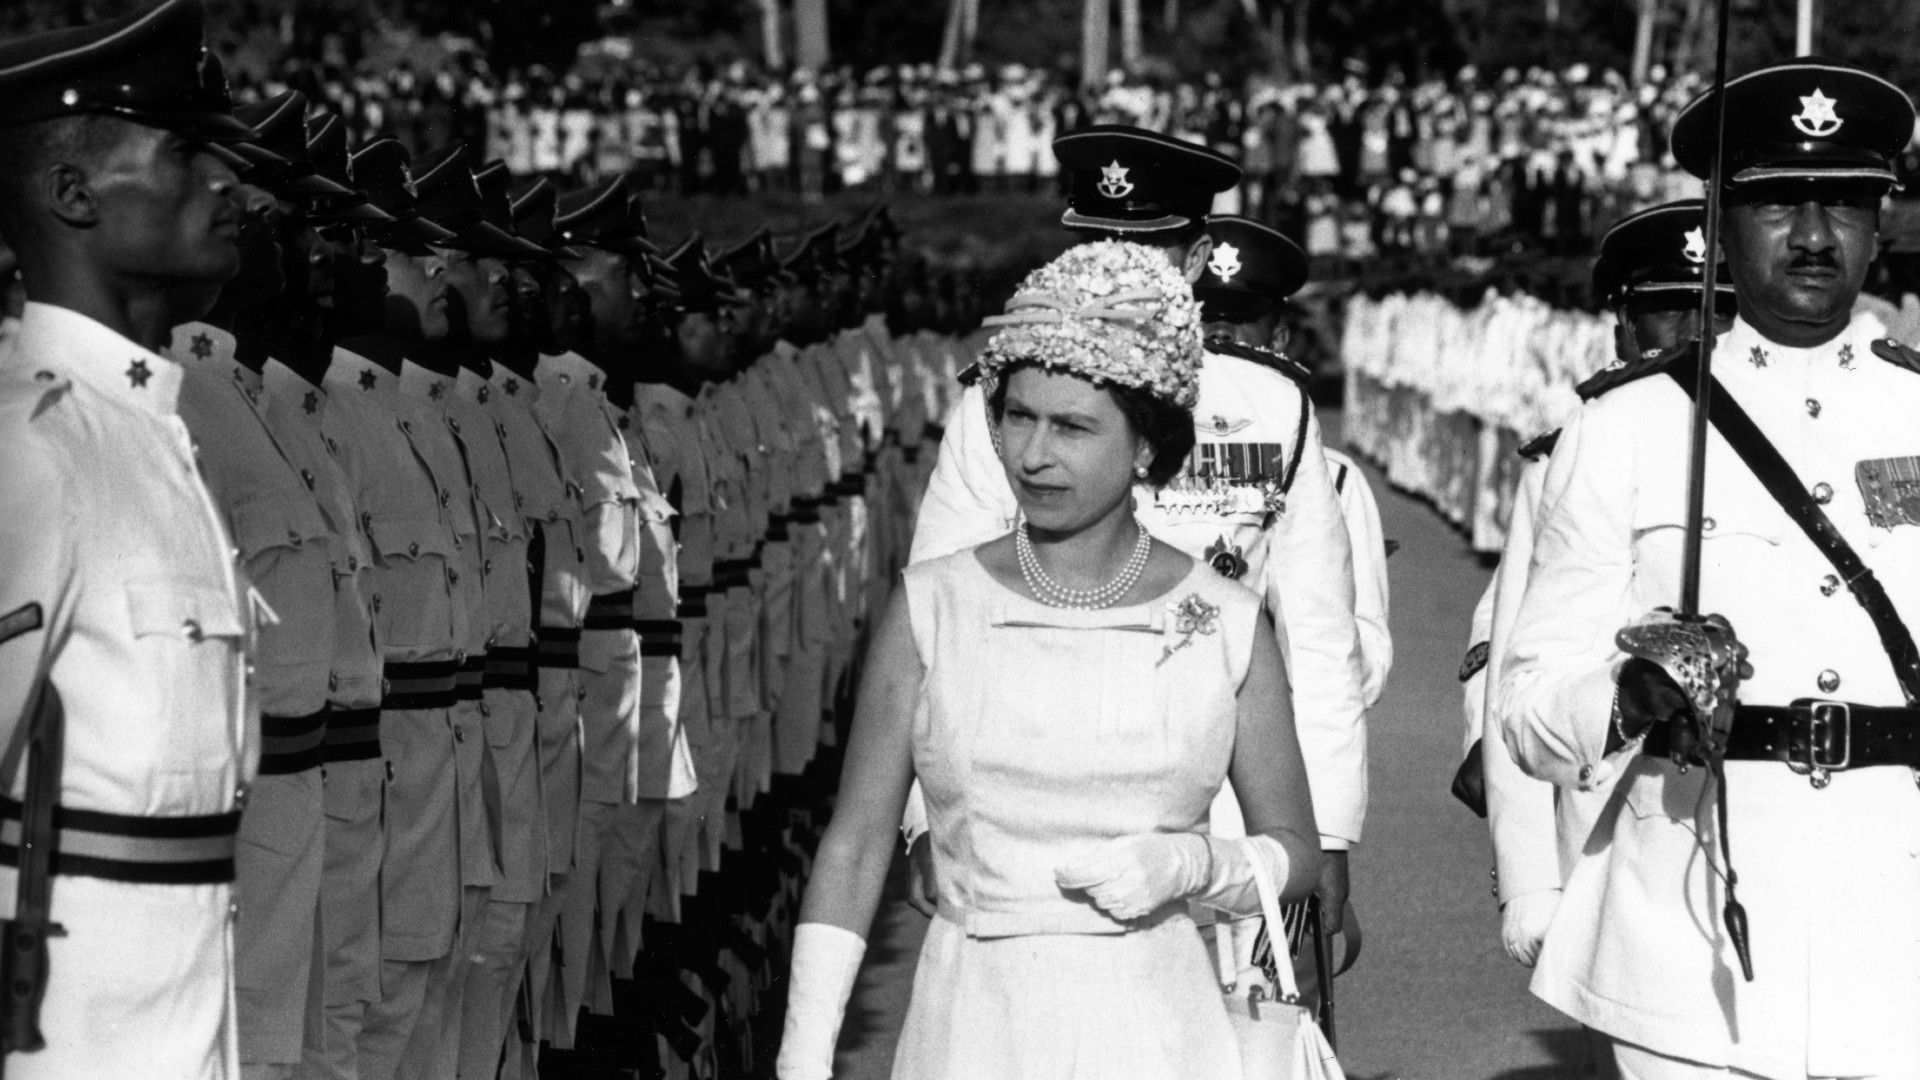 <p>                     On a royal tour of the Caribbean in 1996, the Queen inspected a guard of honour at the Teteron Barracks in Trinidad, a military base that formed part of Trinidad and Tobago’s Defence Force.                   </p>                                      <p>                     The image is strikingly similar to many taken in the UK. The Queen would often inspect UK military troops during important milestones, such as the annual Trooping the Colour celebrations.                   </p>                                      <p>                     The Queen’s visit to Trinidad & Tobago formed part of a larger, and very busy, Caribbean tour, in which she and the Duke of Edinburgh stopped in Saint Kitts & Nevis, the Bahamas, Antigua, Barbados, Jamaica, Grenada, Saint Lucia, Montserrat, and many more.                   </p>